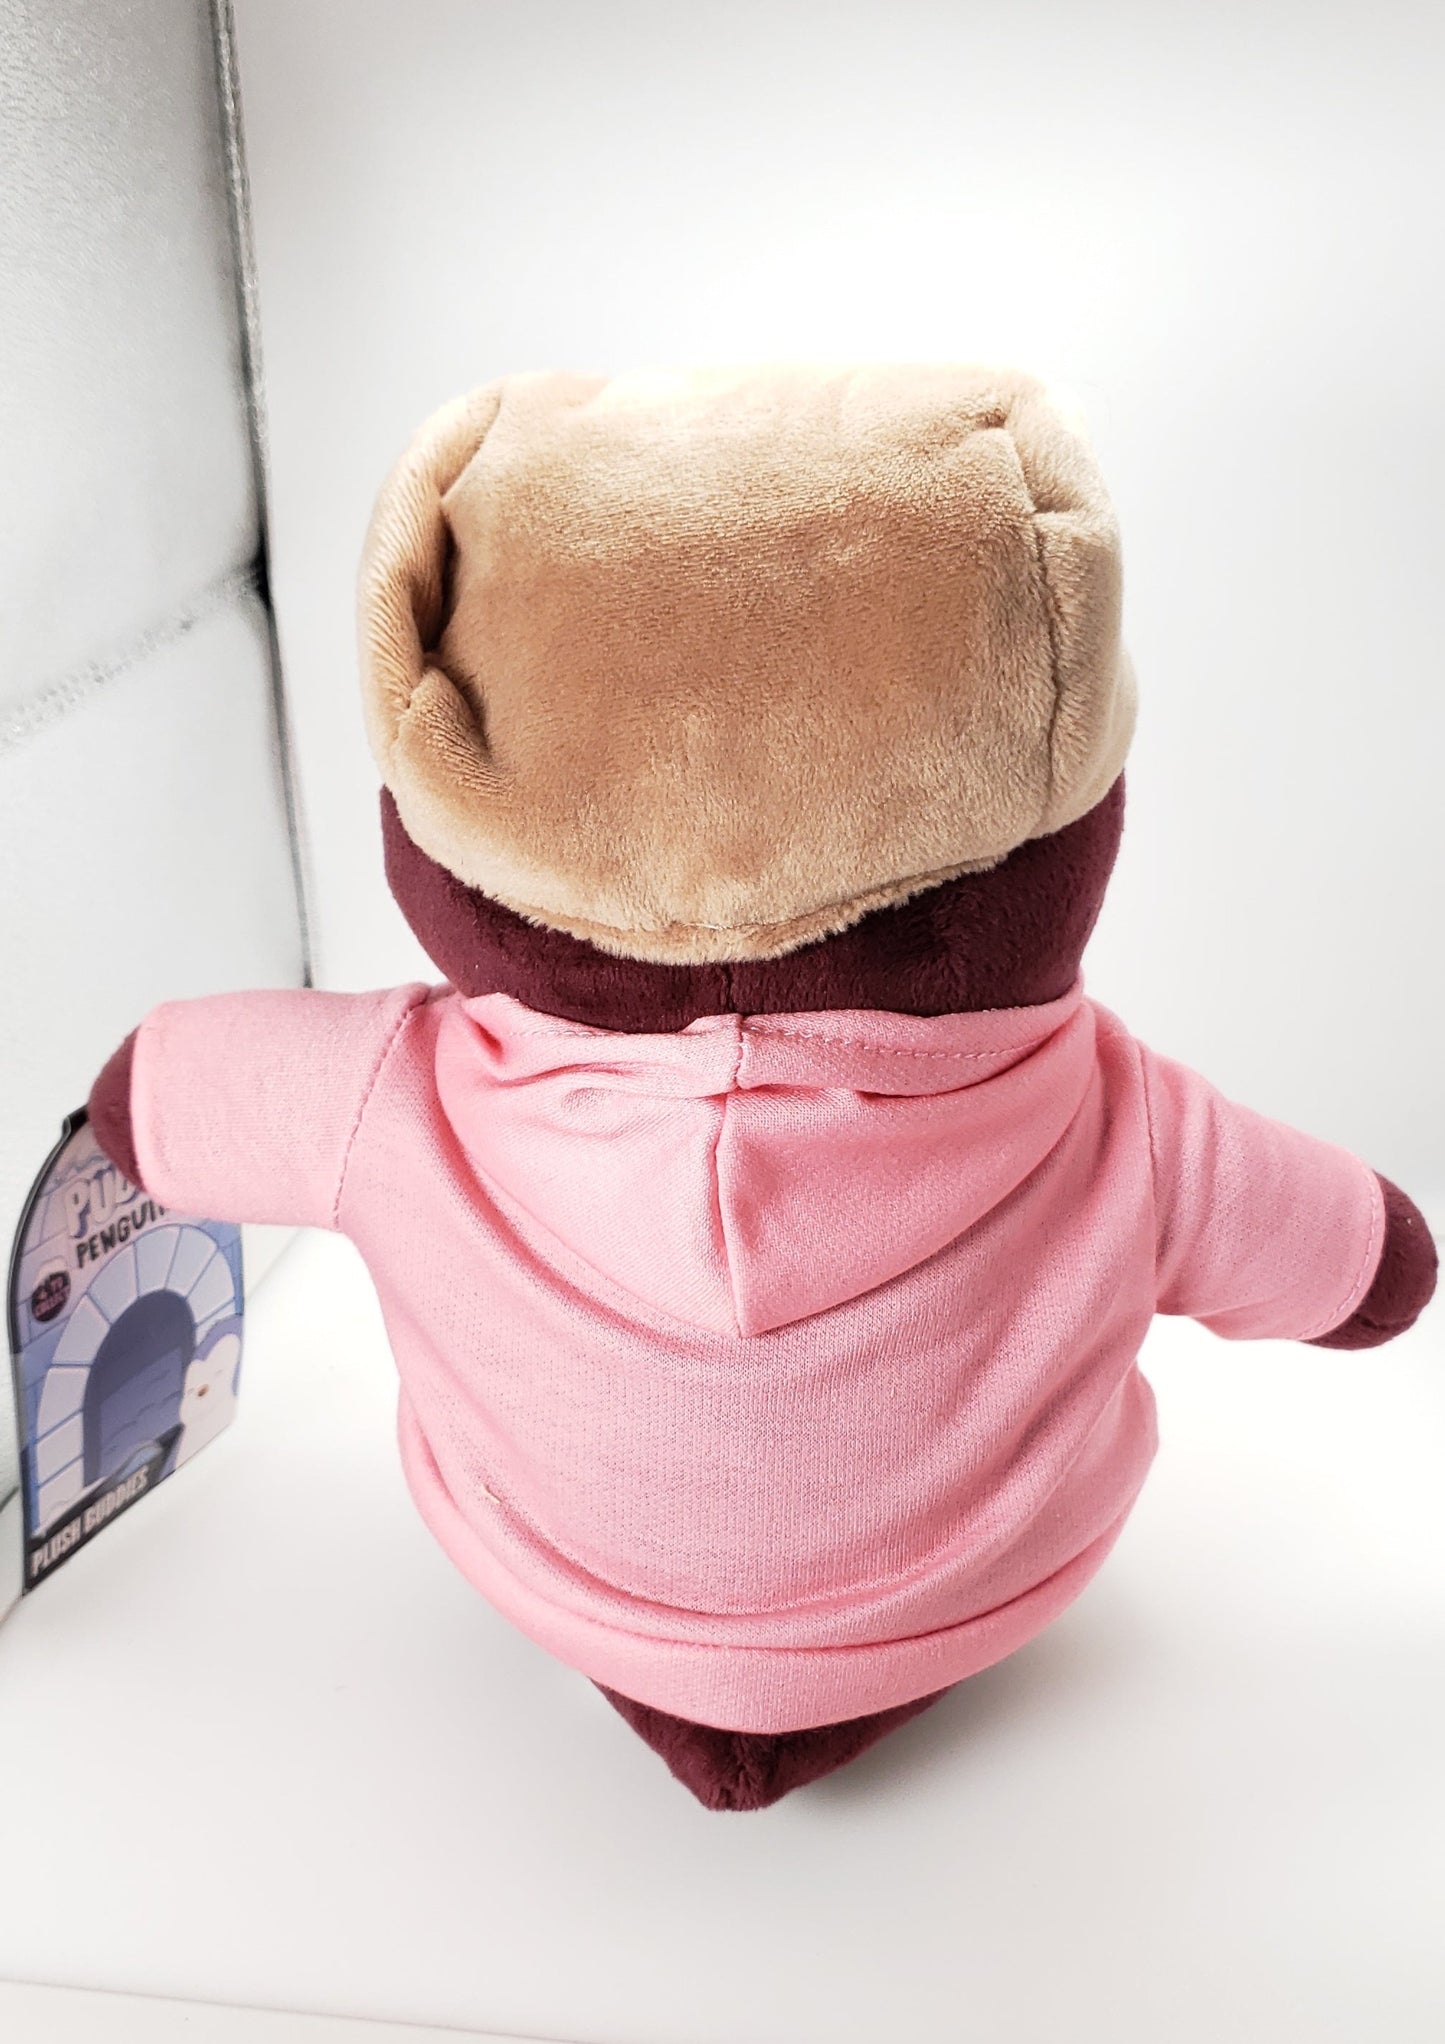 Pudgy Penguins Plush - Hat and Pink Hoodie 8inch